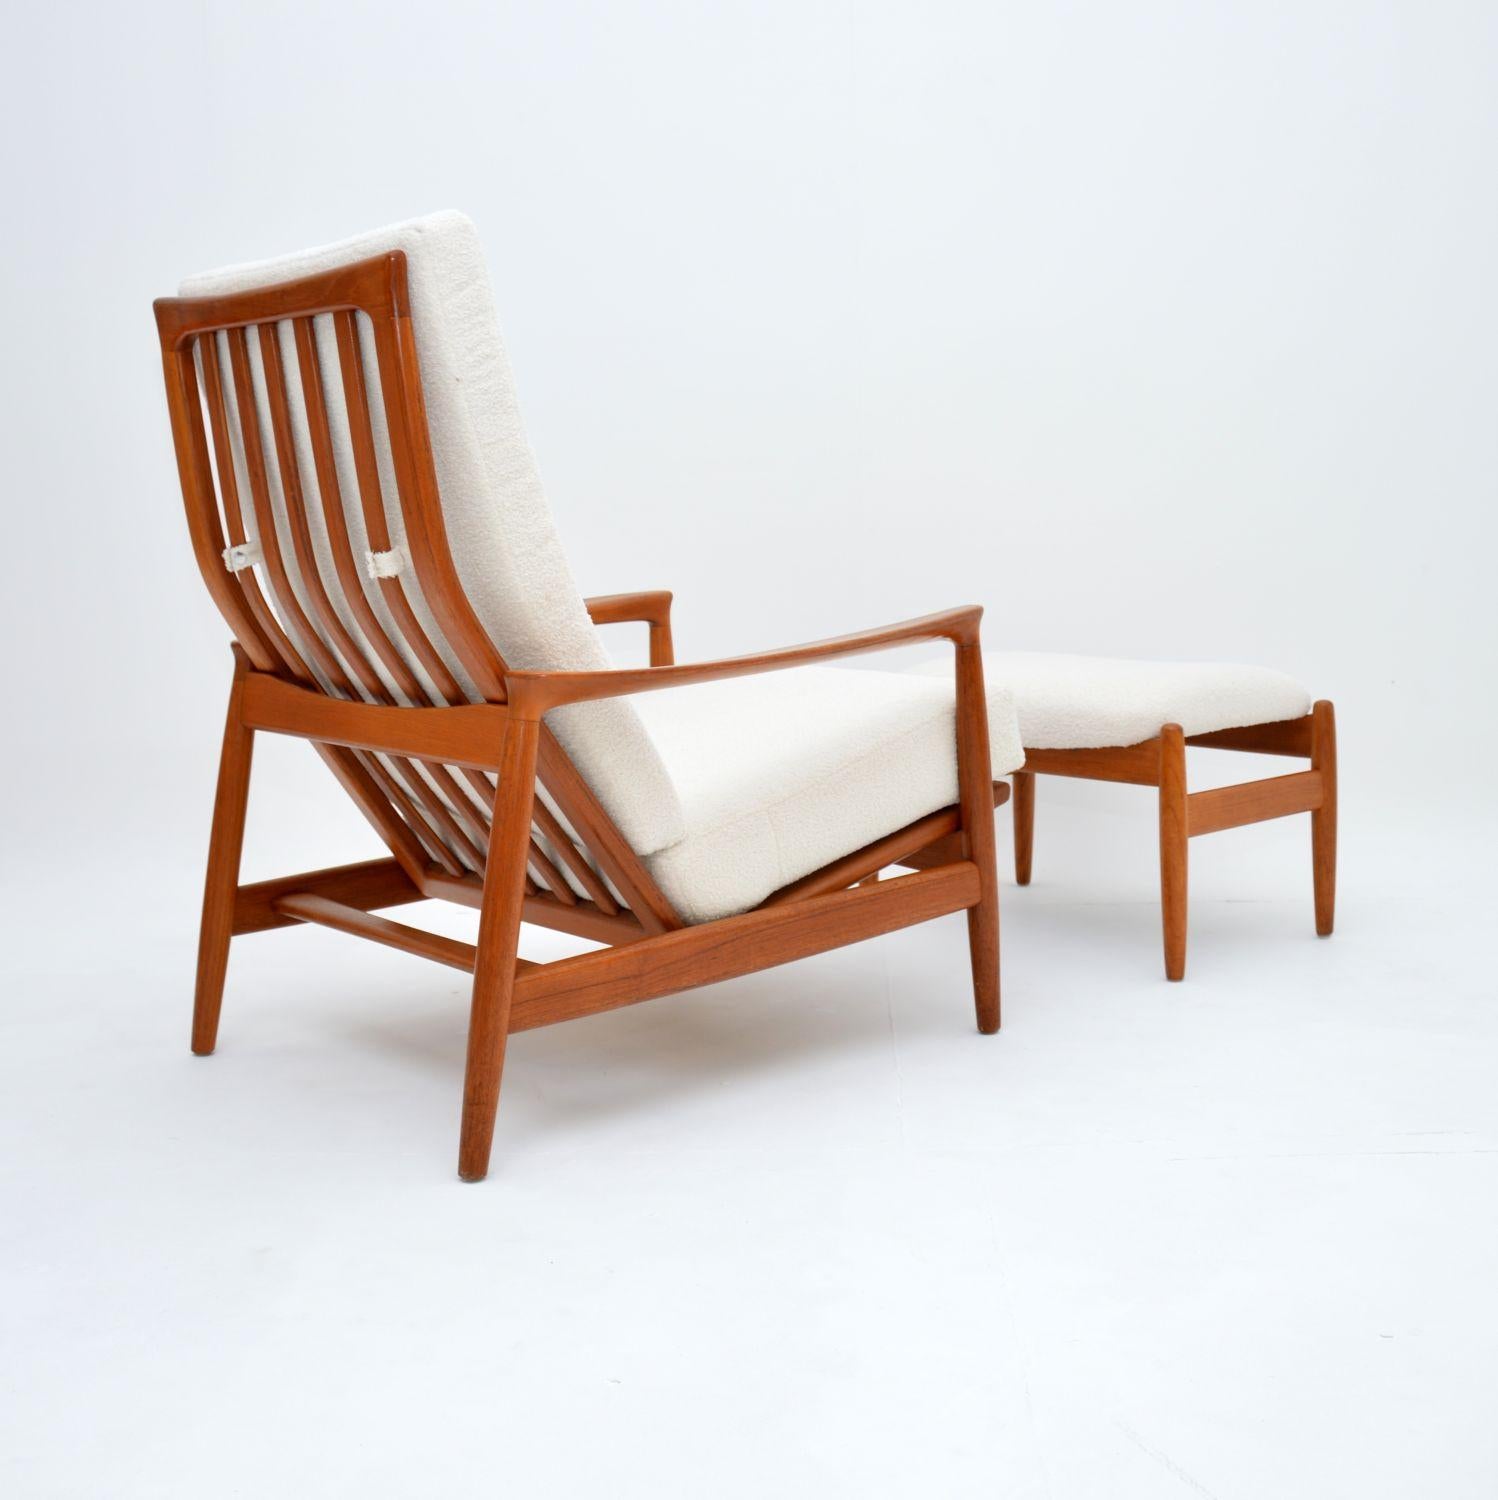 1960s Swedish Vintage Teak Armchair & Stool by Folke Ohlsson In Good Condition For Sale In London, GB